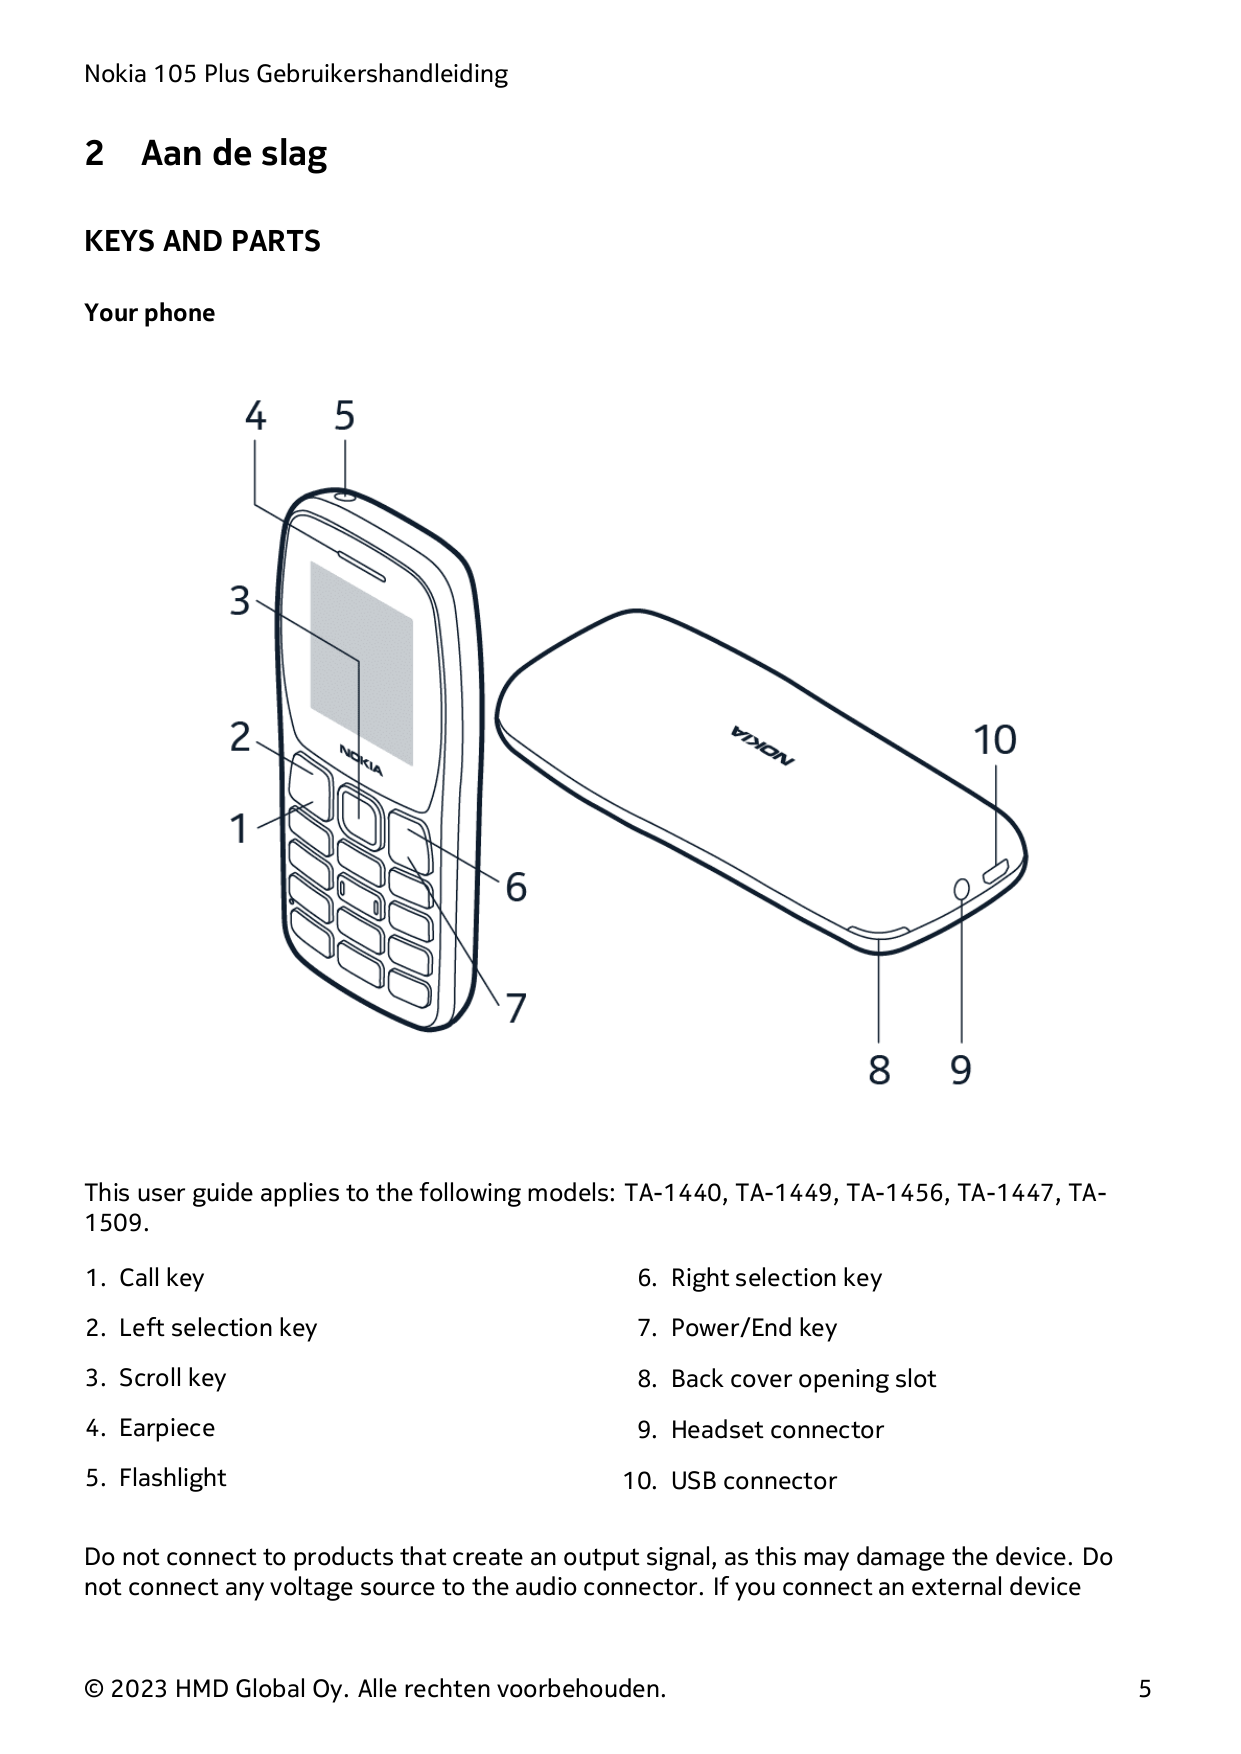 Nokia 105 Plus Gebruikershandleiding2Aan de slagKEYS AND PARTSYour phoneThis user guide applies to the following models: TA-1440